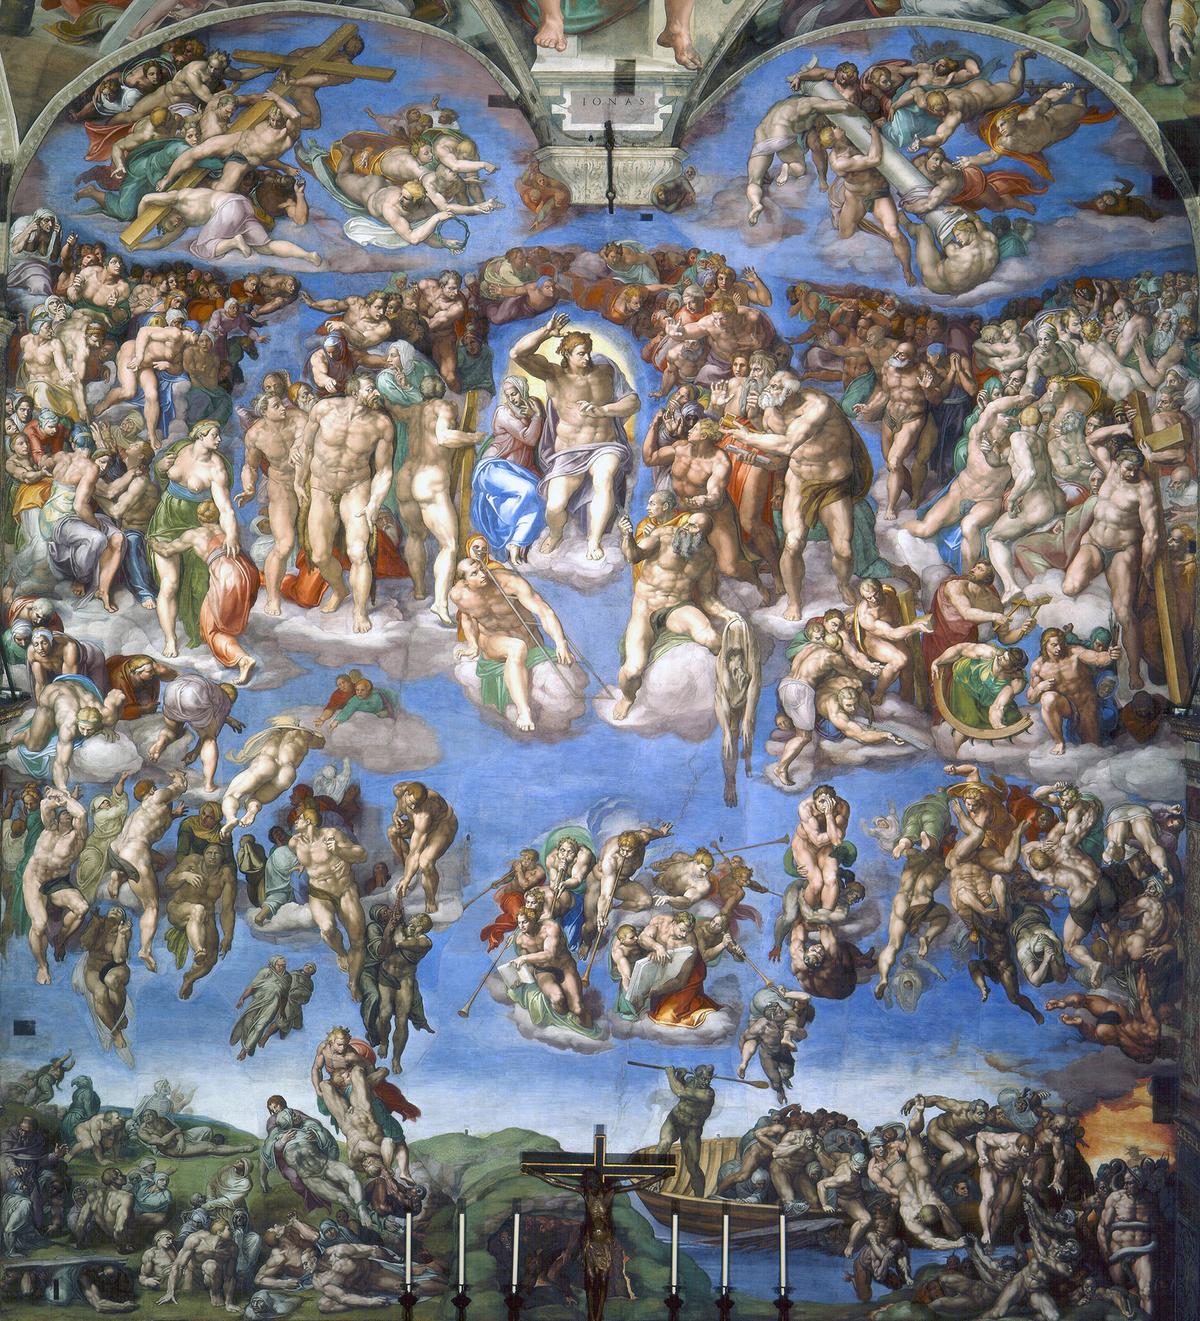 "The Last Judgement," circa 1536–1541, by Michelangelo. Fresco; 14.9 by 13.3 yards. Sistine Chapel in Rome. (Public Domain)